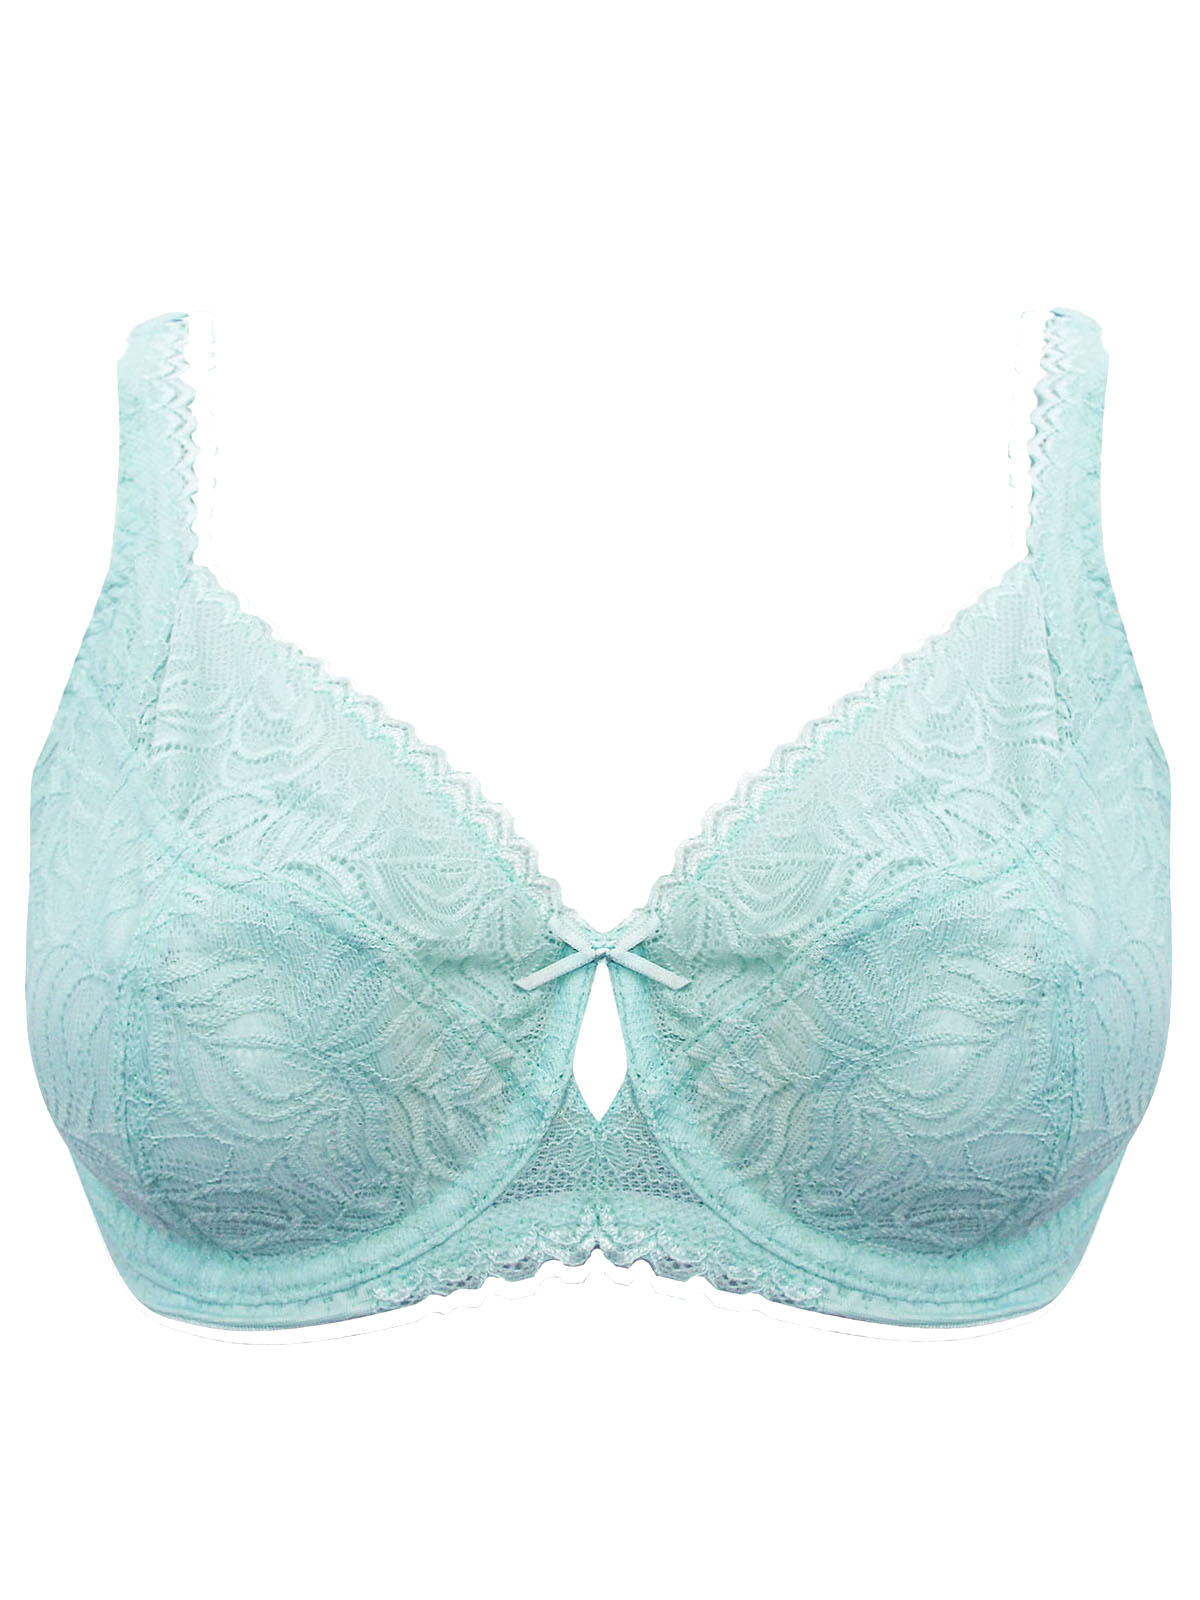 George - - G3ORGE AQUA Lace Underwired Non-Padded Bra - Size 36 to 42 ...